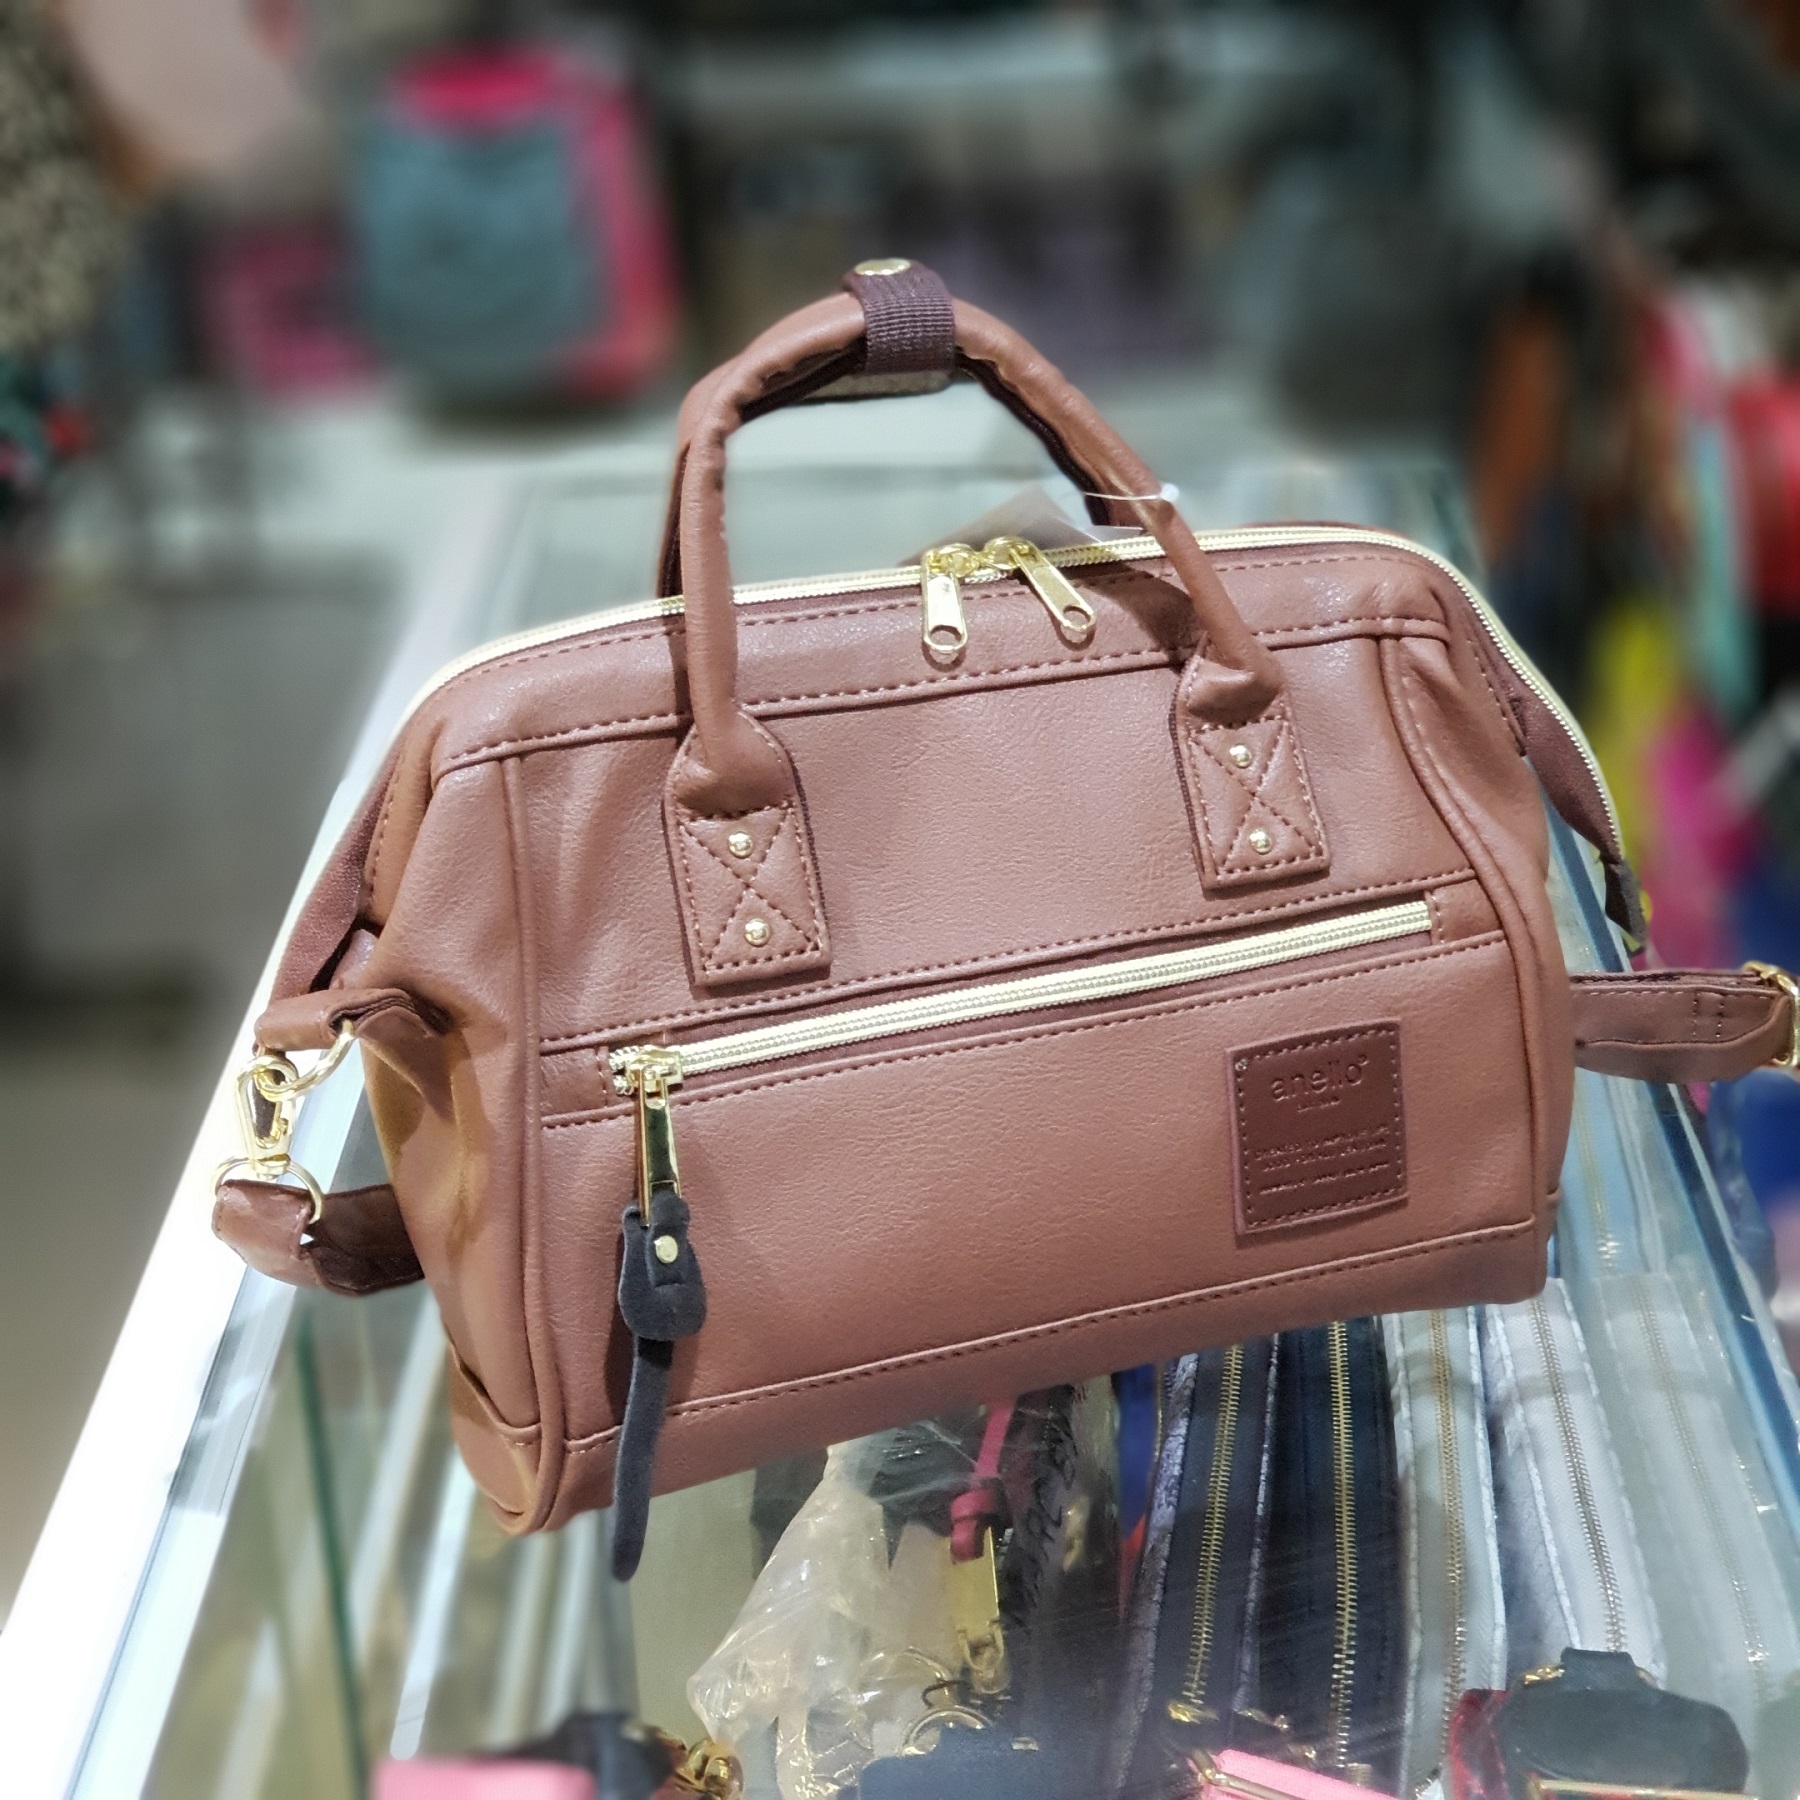 Authentic ANELLO PU Leather Mini Boston Sling Bag - Bags & Wallets for sale  in Kulai, Johor